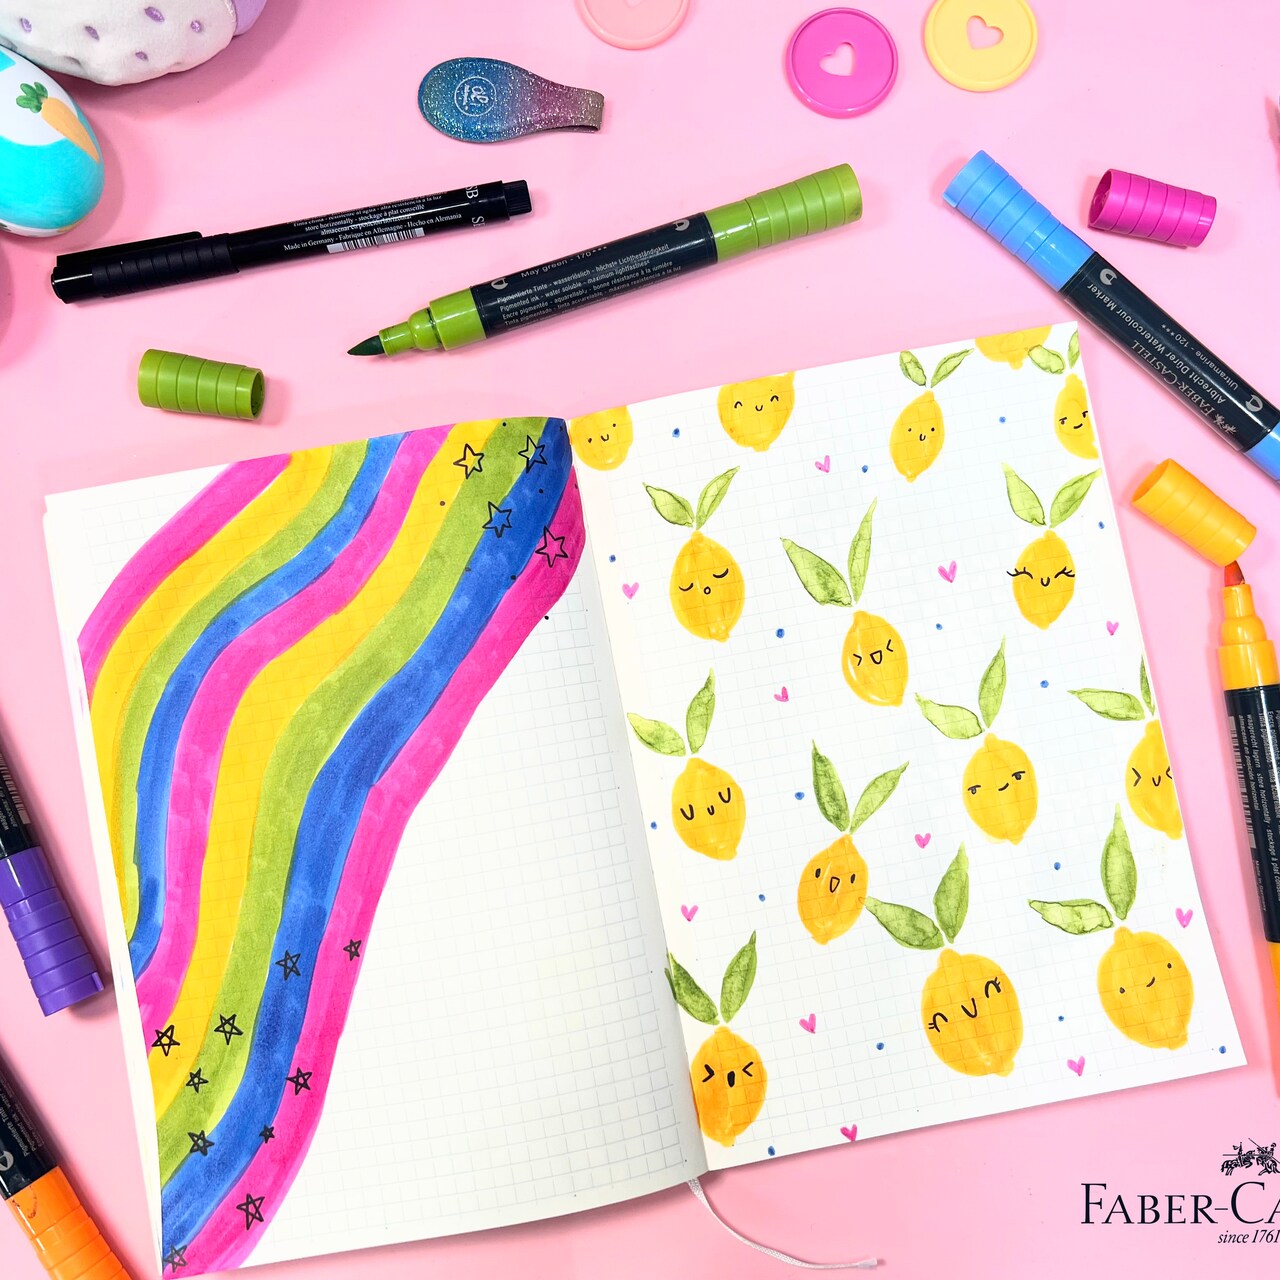 Fill Your Sketchbook with Faber-Castell®